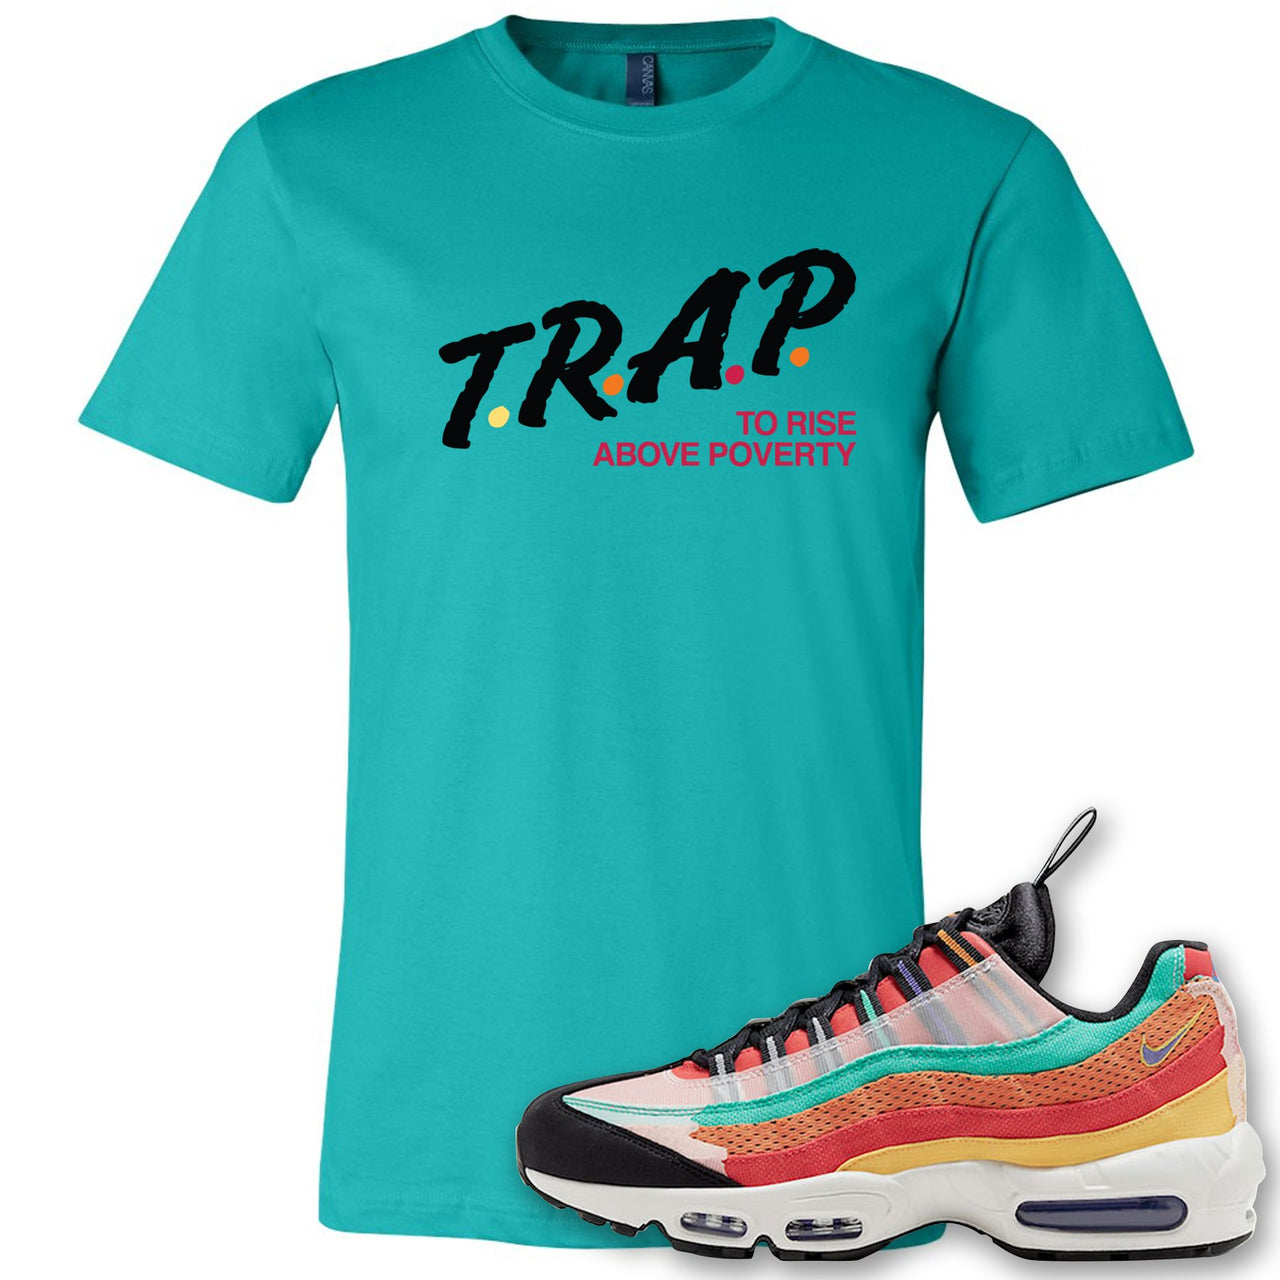 Air Max 95 Black History Month Sneaker Antique Jade Dome T Shirt | Tees to match Nike Air Max 95 Black History Month Shoes | Trap To Rise Above Poverty